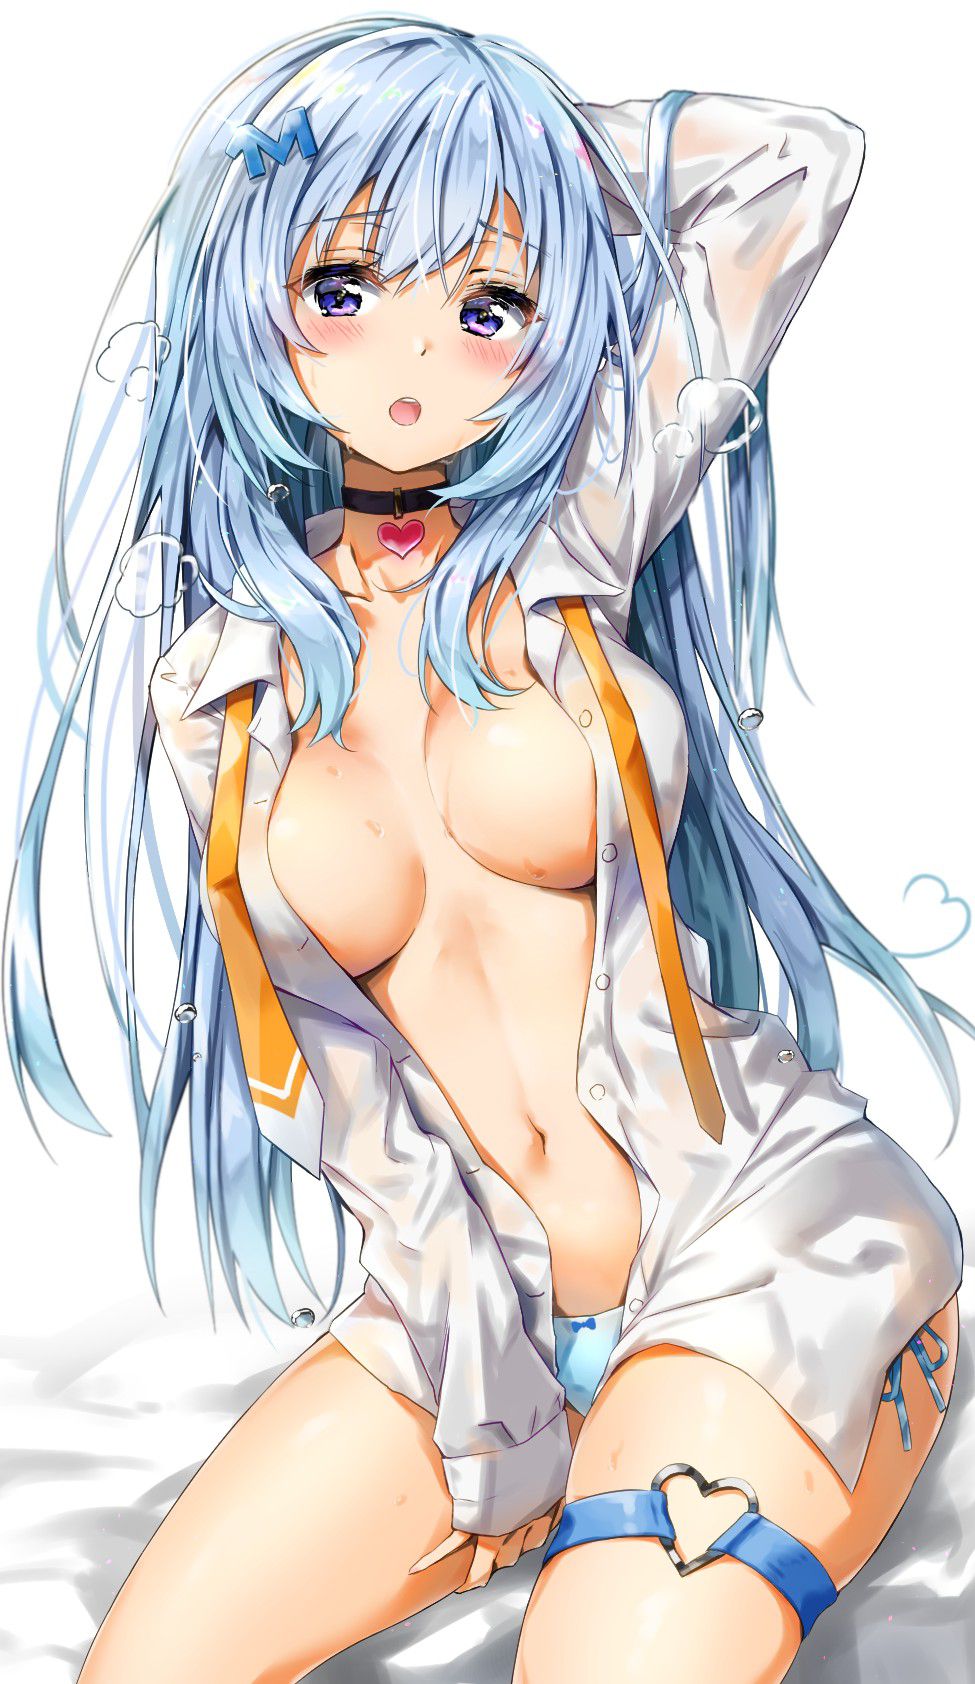 [Secondary] erotic image of a cute girl with blue hair 11